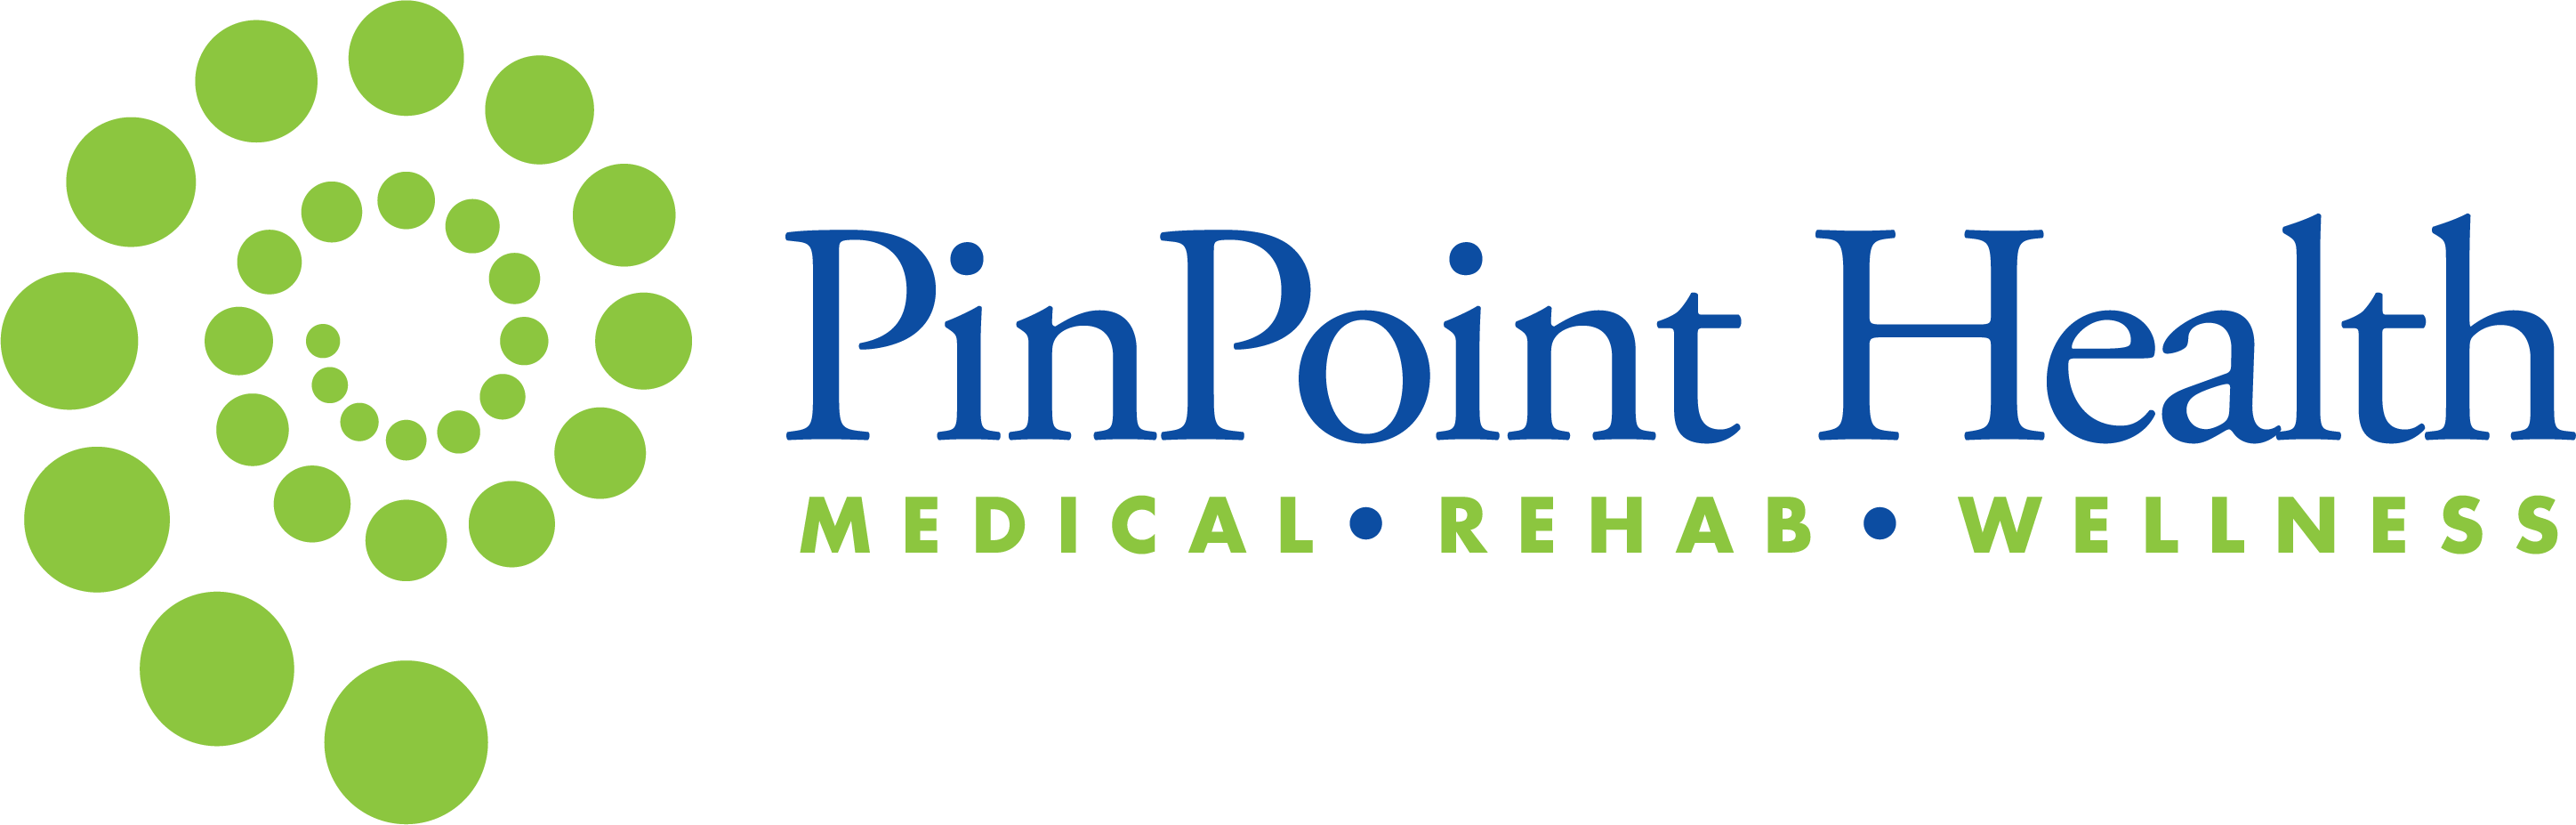 PinPoint Health New_POSITIVE_MEDICAL ADDED (1)